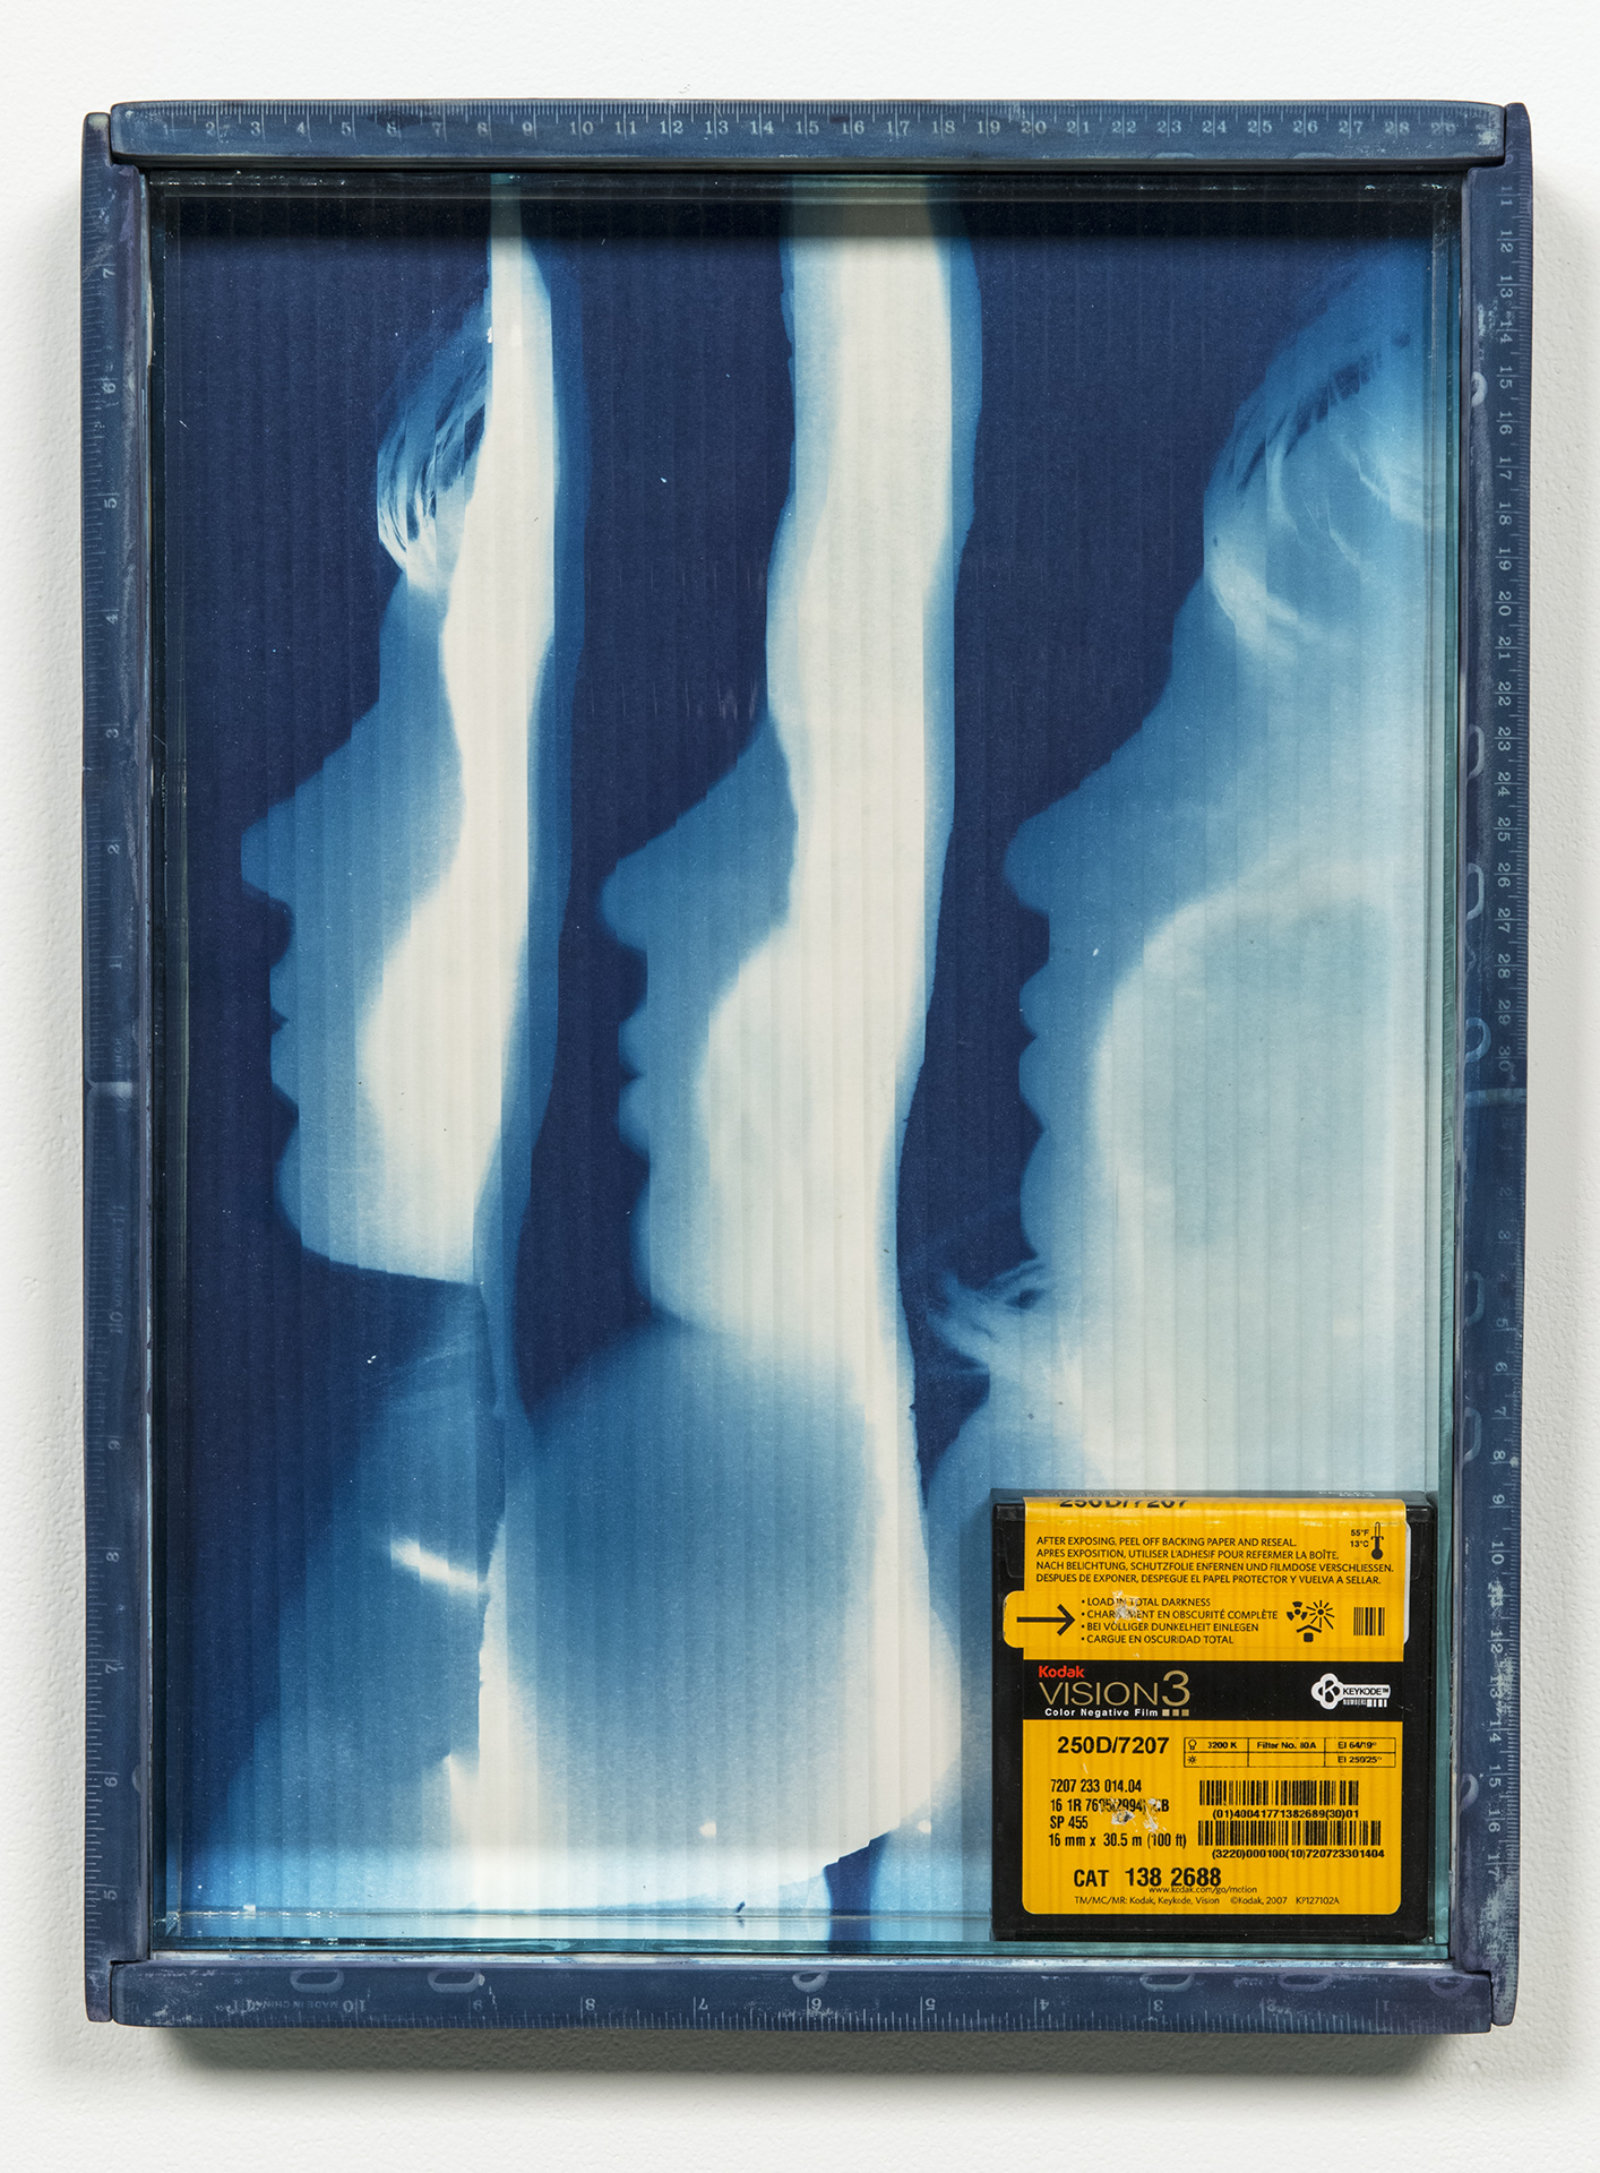 Kasper Feyrer, Vision3, 2012, cyanotype treated pine wood frame, cyanotype on watercolour paper, mirror inset, quarter reed architectural glass, 16mm vision3 kodak 100ft film canister, 17 x 13 in. (43 x 32 cm)